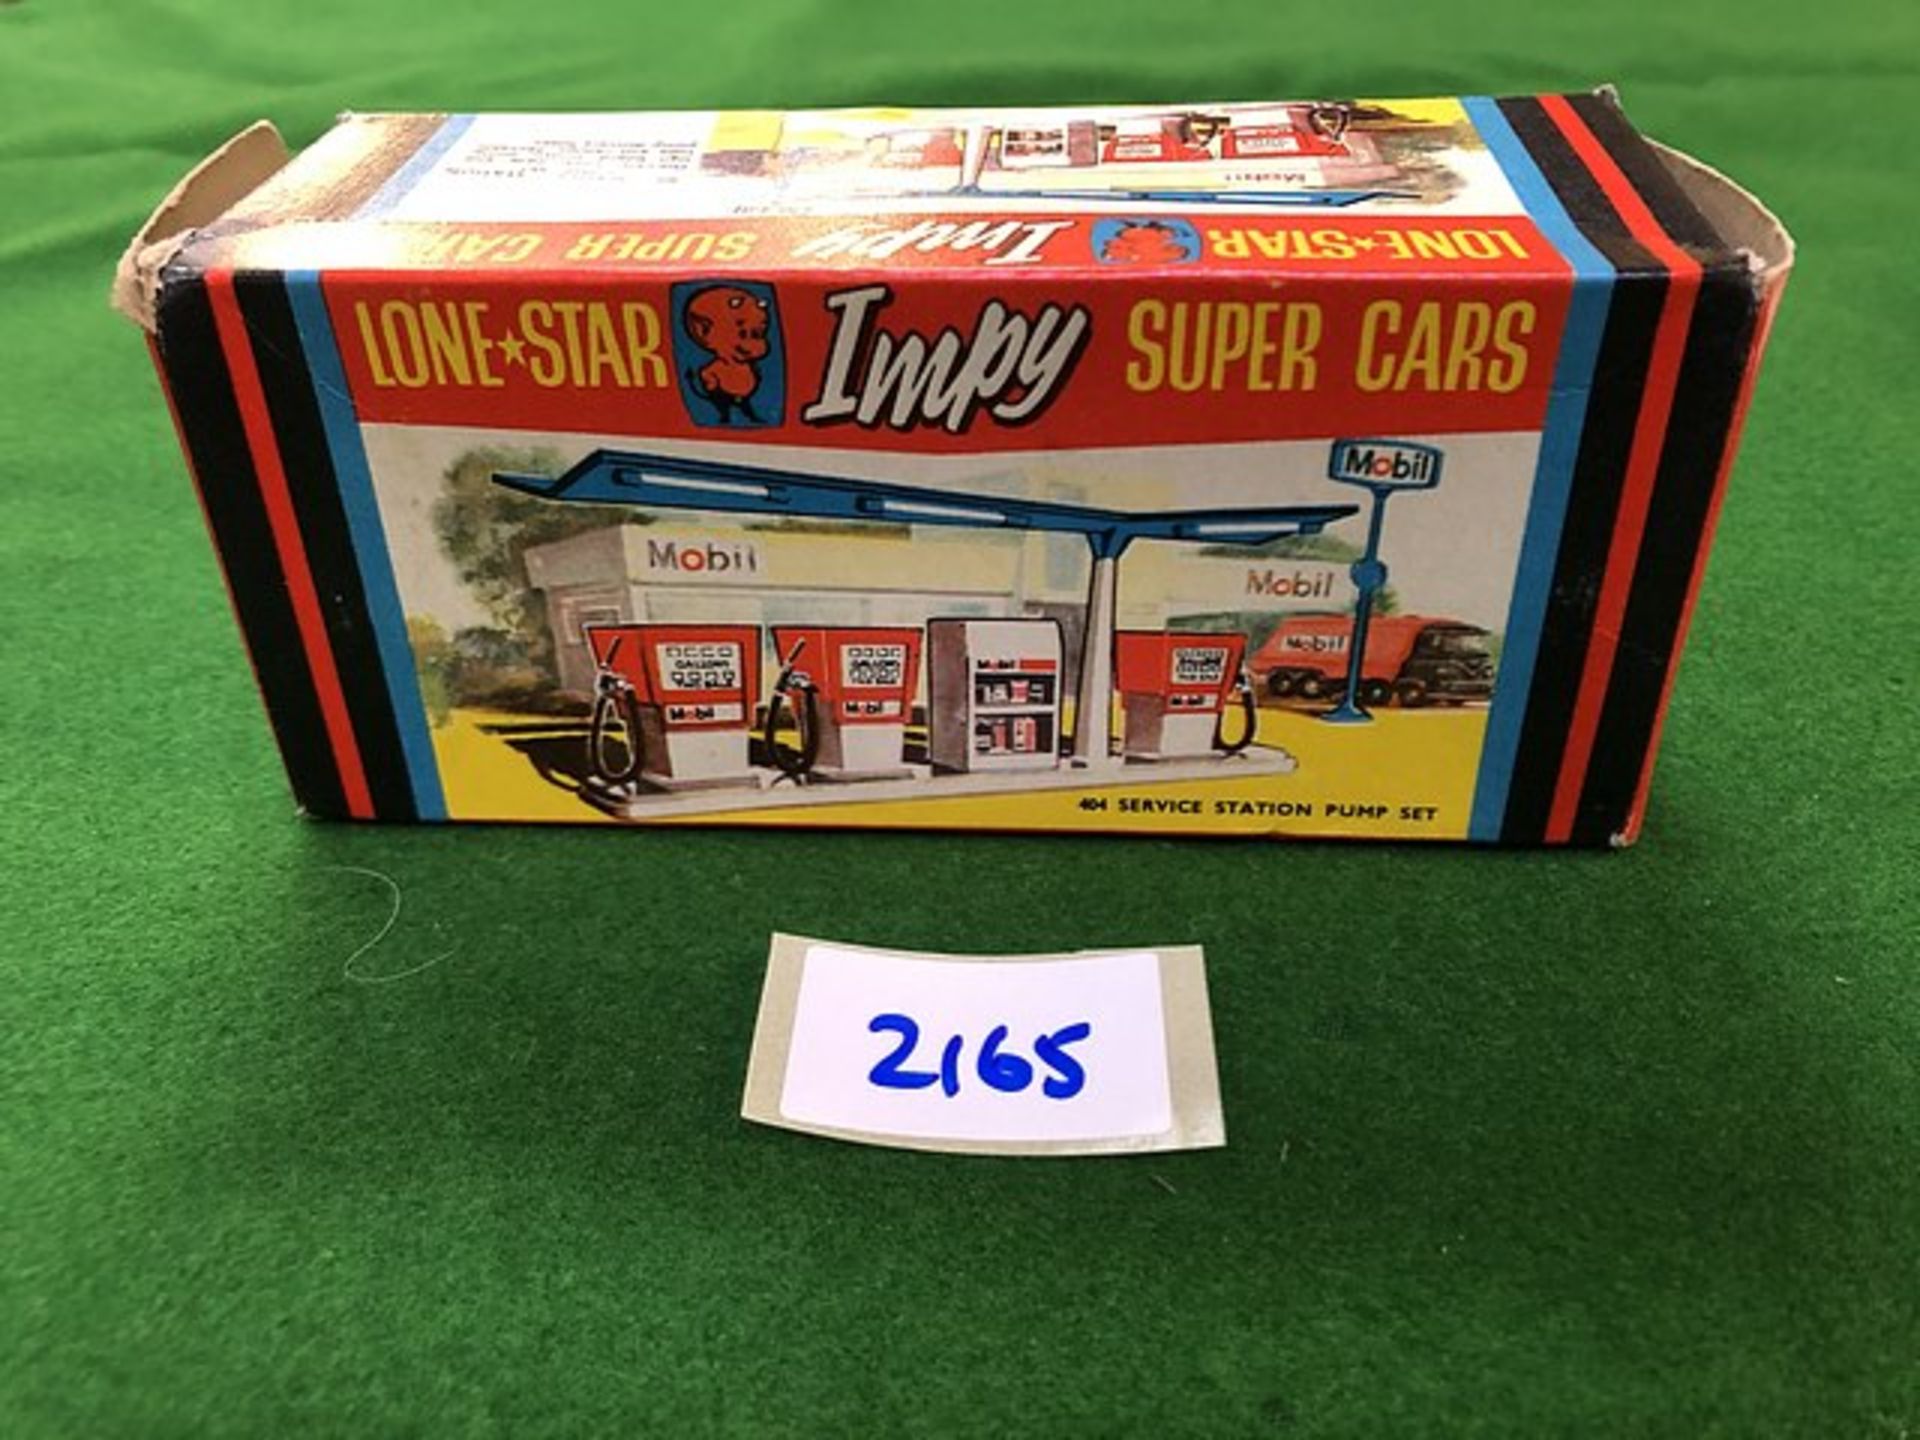 Lone Star Impy, Road Master Super Cars Service Station Petrol Pumps 1/59 Scale Complete With Box